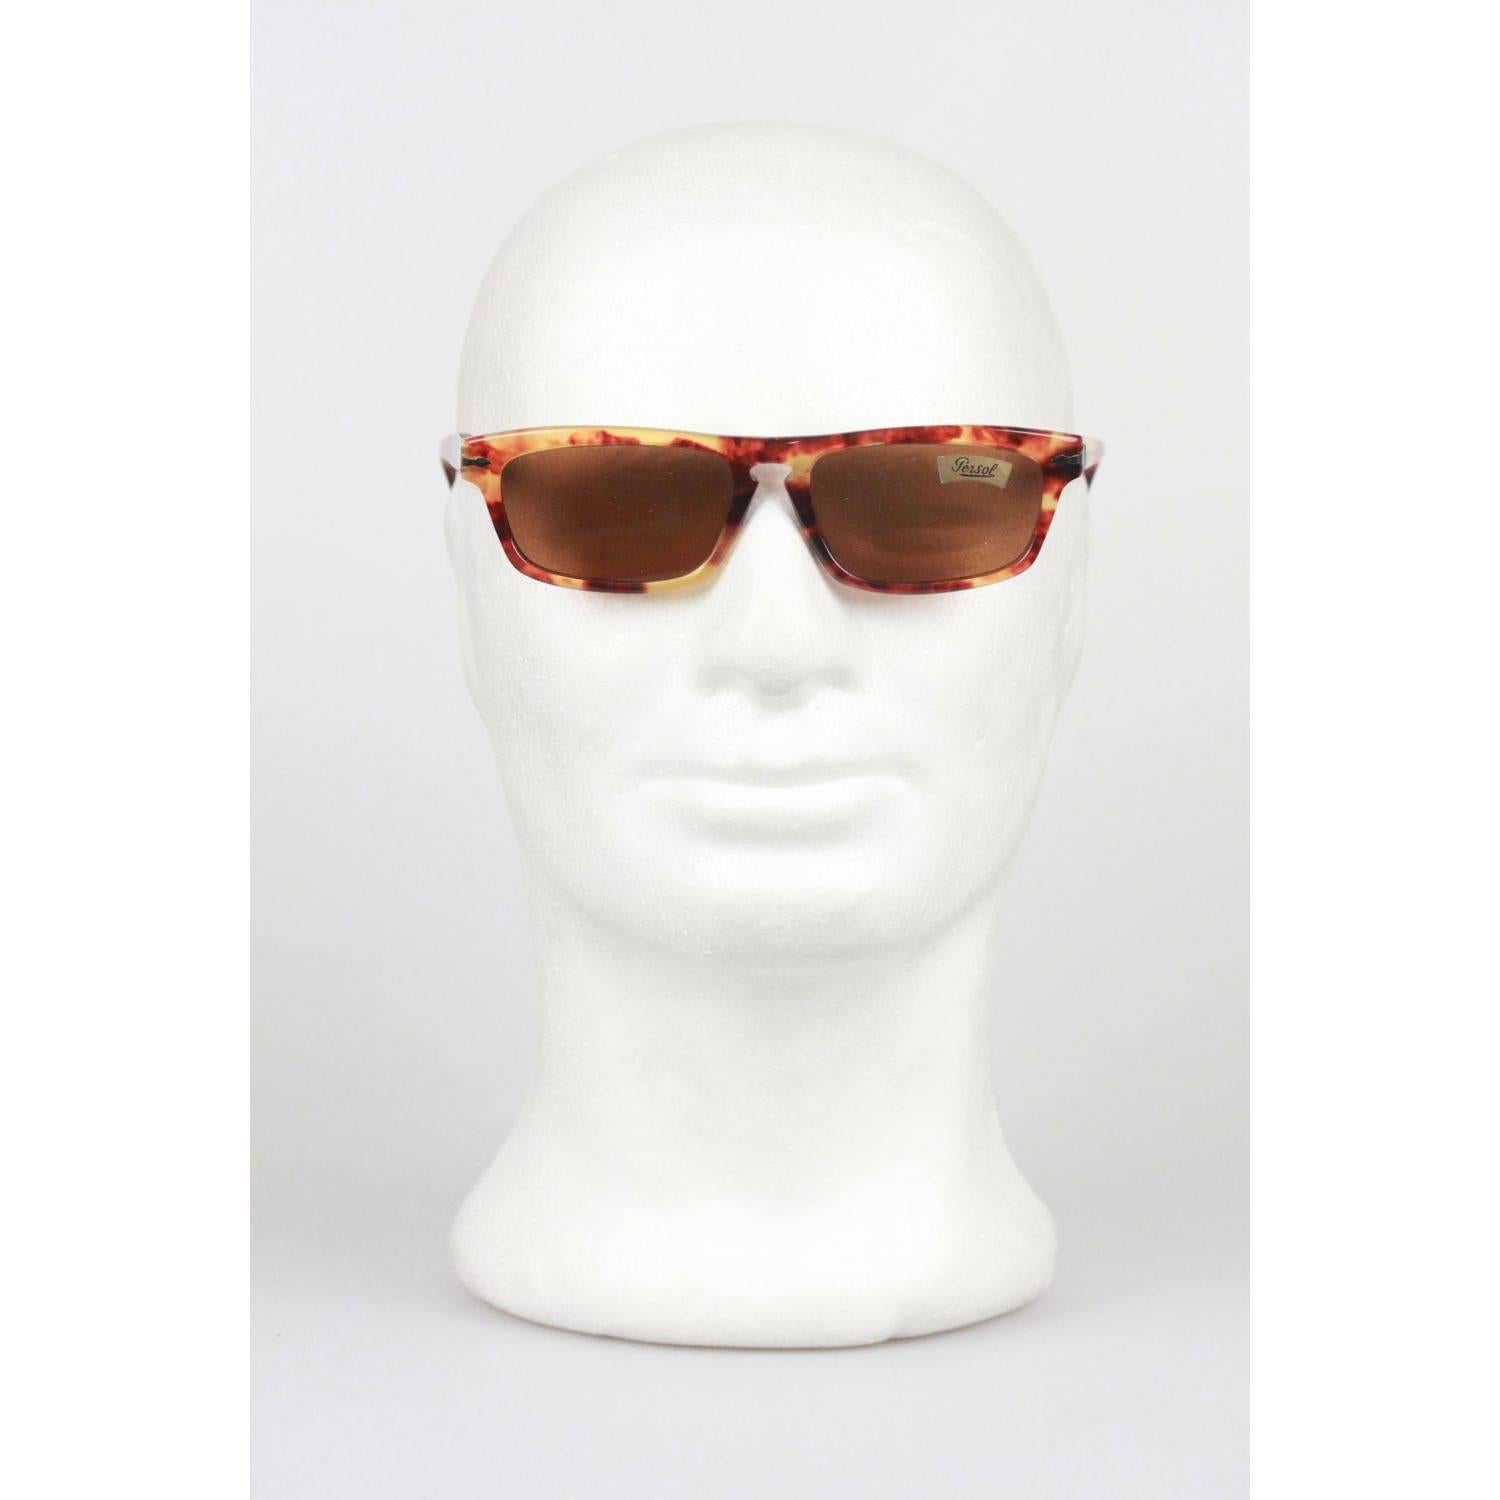 - Vintage Persol 836 sunglasses feature a brown tortoise shell frame
- Original 100% UV protection brown lenses (PERSOL logo on both lenses)
- Flexible temple (thanks to MEFLECTO System)
- Made in Italy
- Style & Mod. Mod. 836 - 60-17 - 142 -